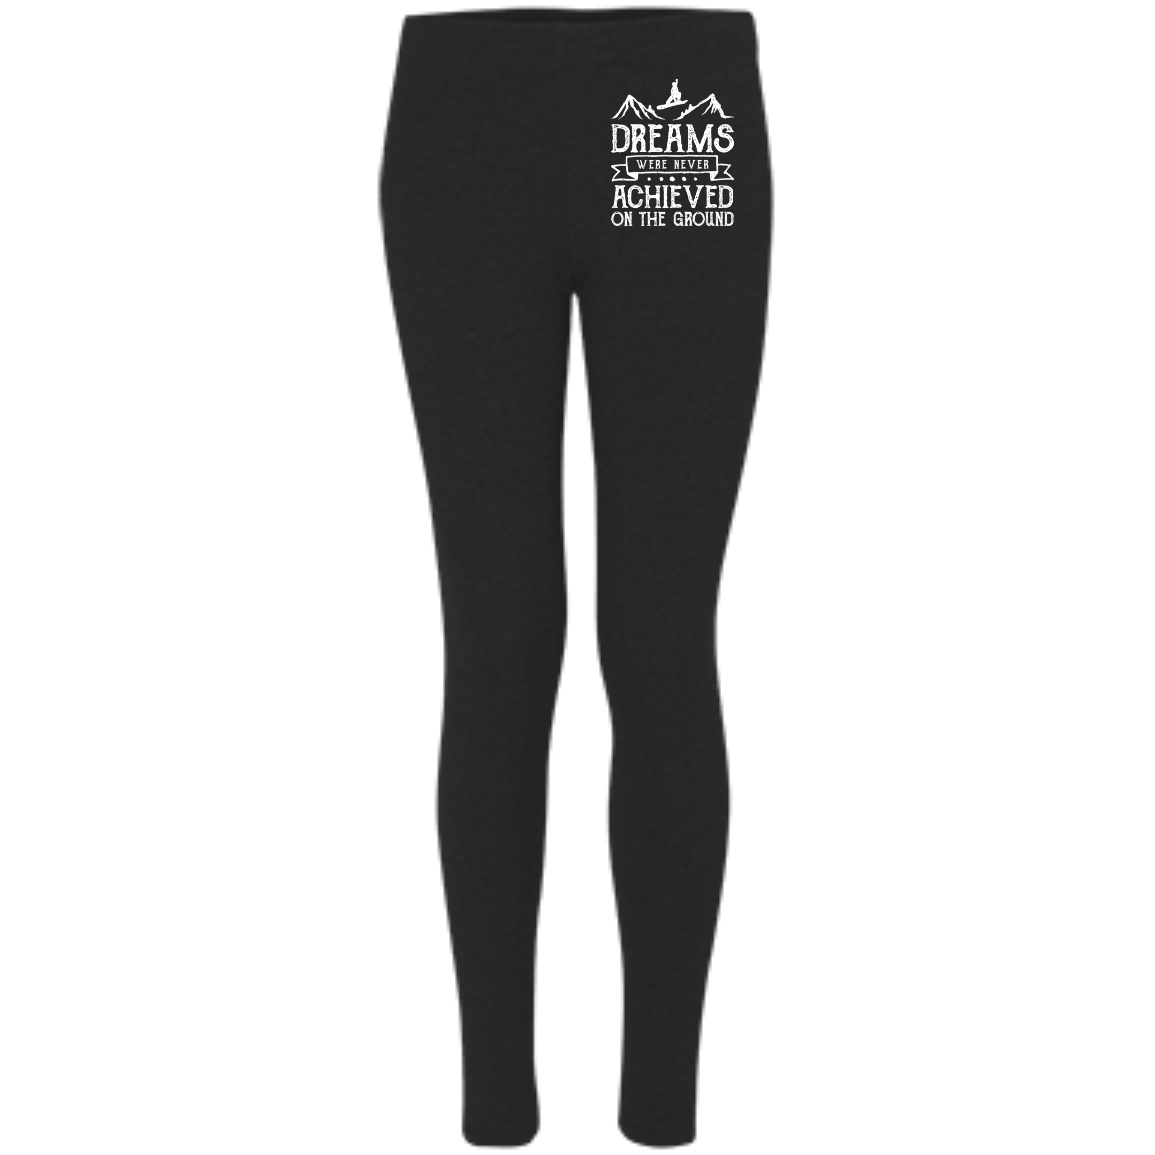 Dreams were Never Achieved on the Ground Women's Embroidered Leggings - Powderaddicts